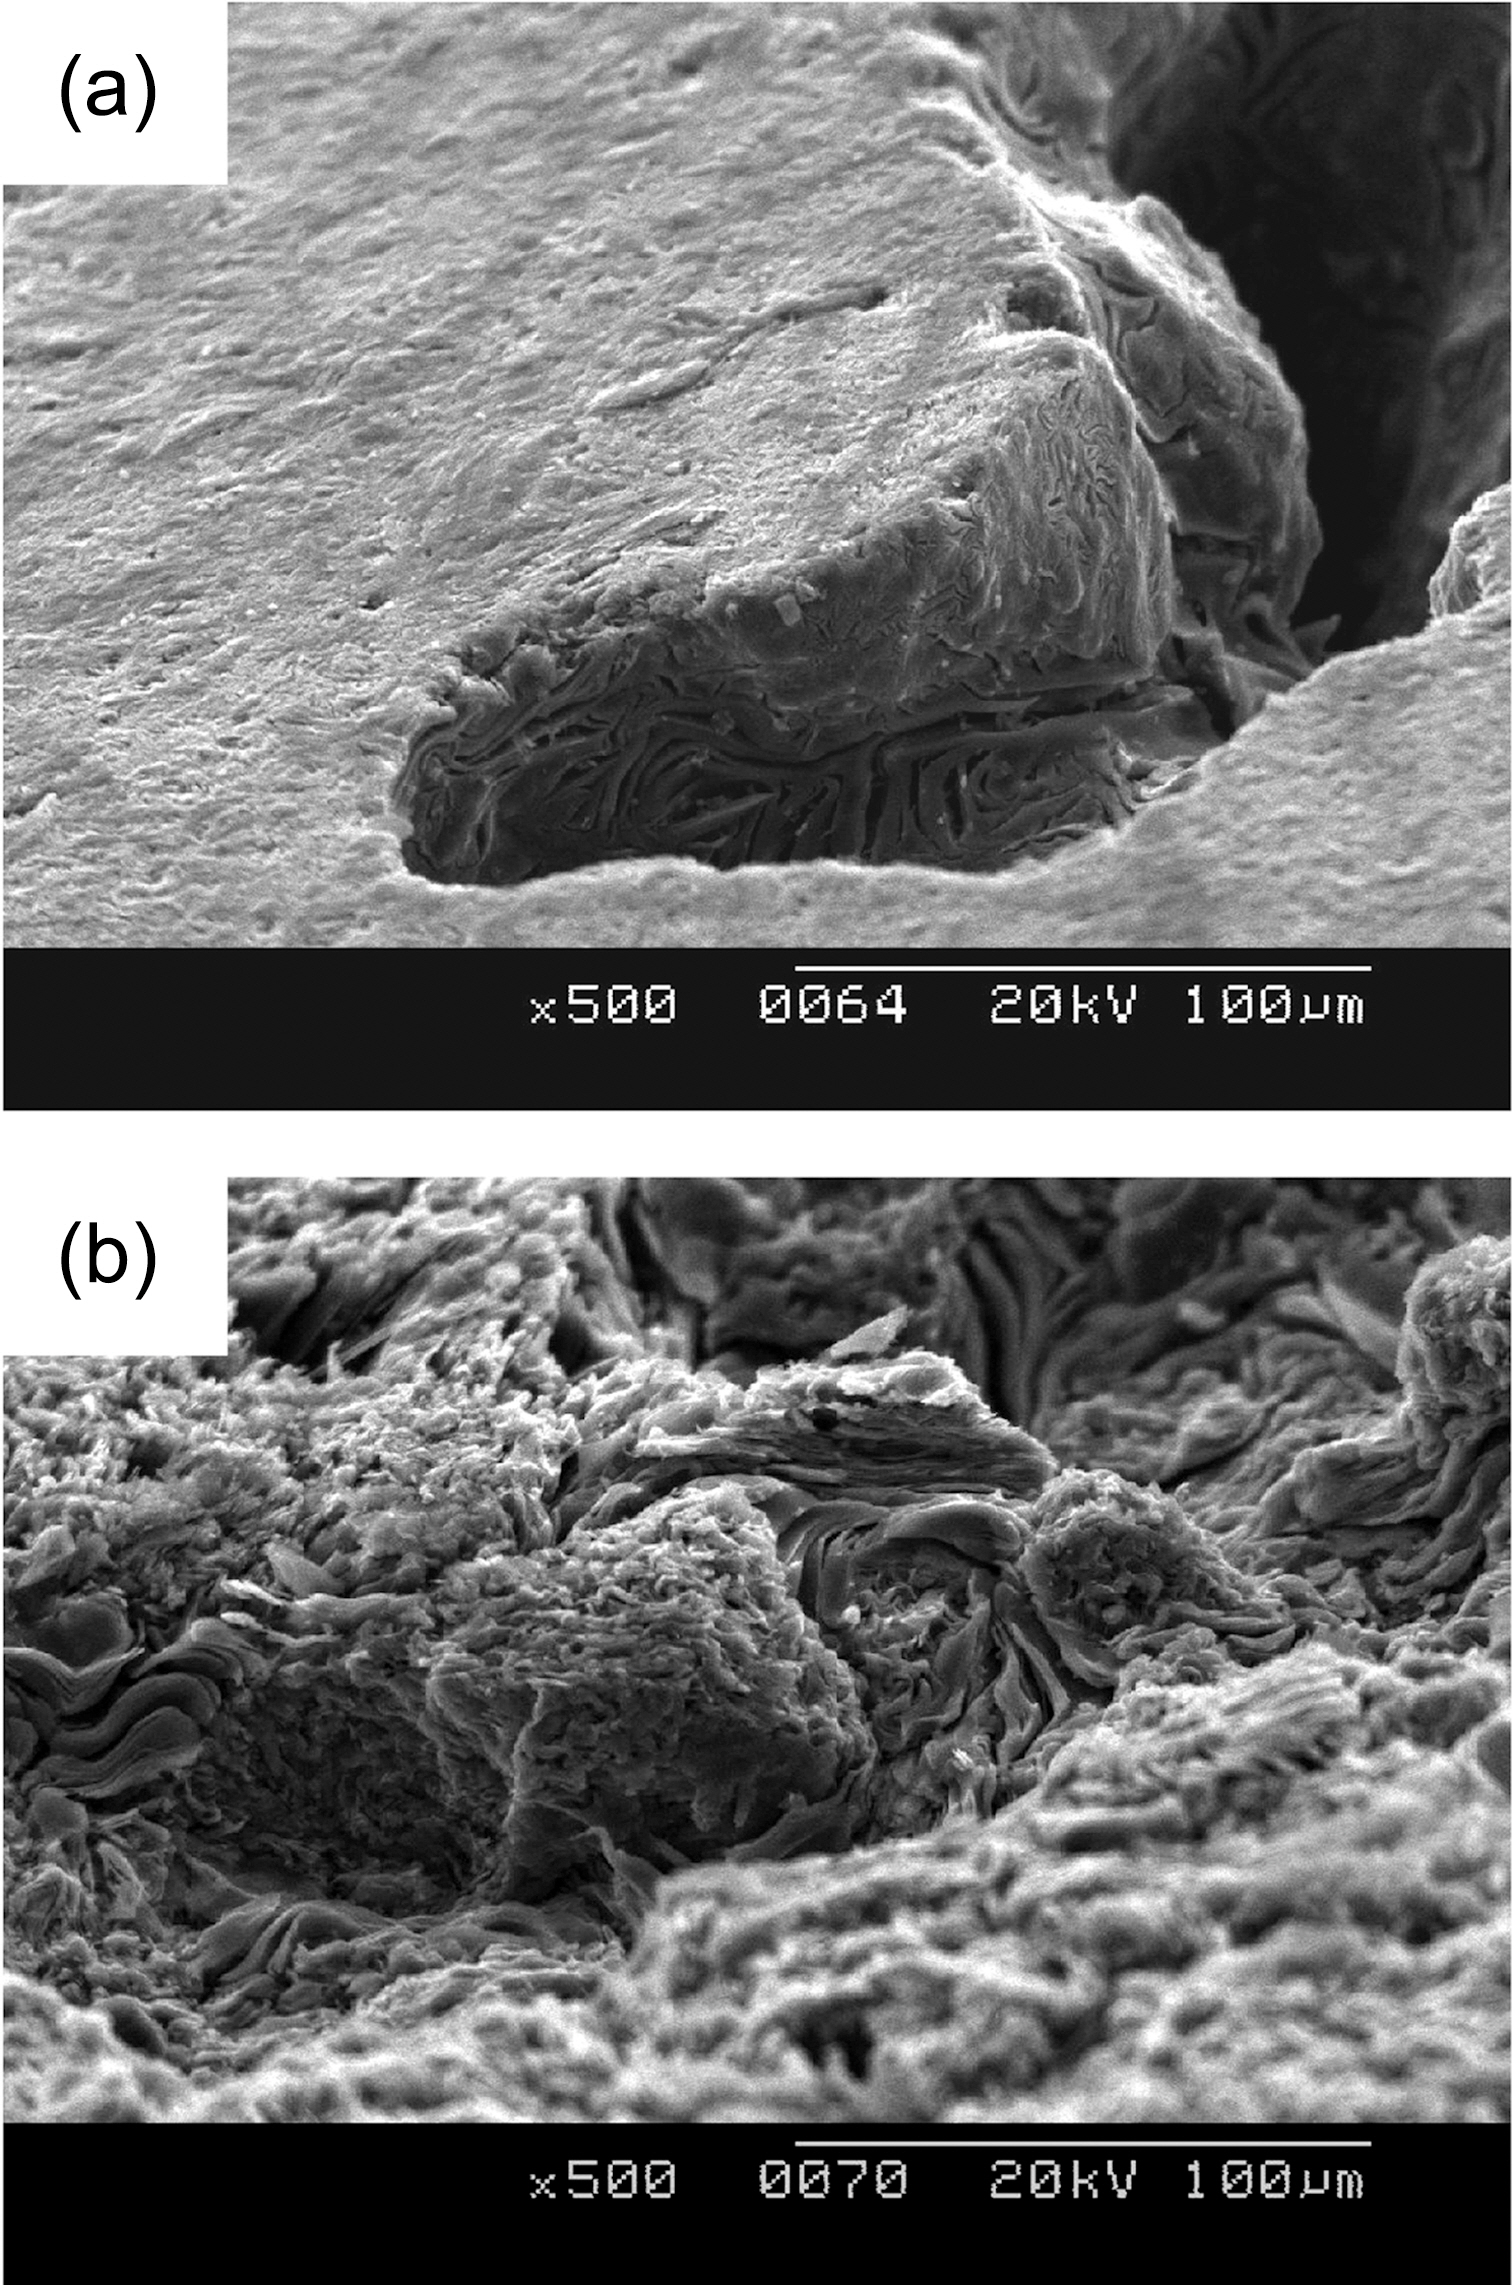 SEM micrographs (×500) showing the pore structures ofPCEA with 0% (a) and 5% (b) weight loss respectively. SEM:scanning electron microscope.